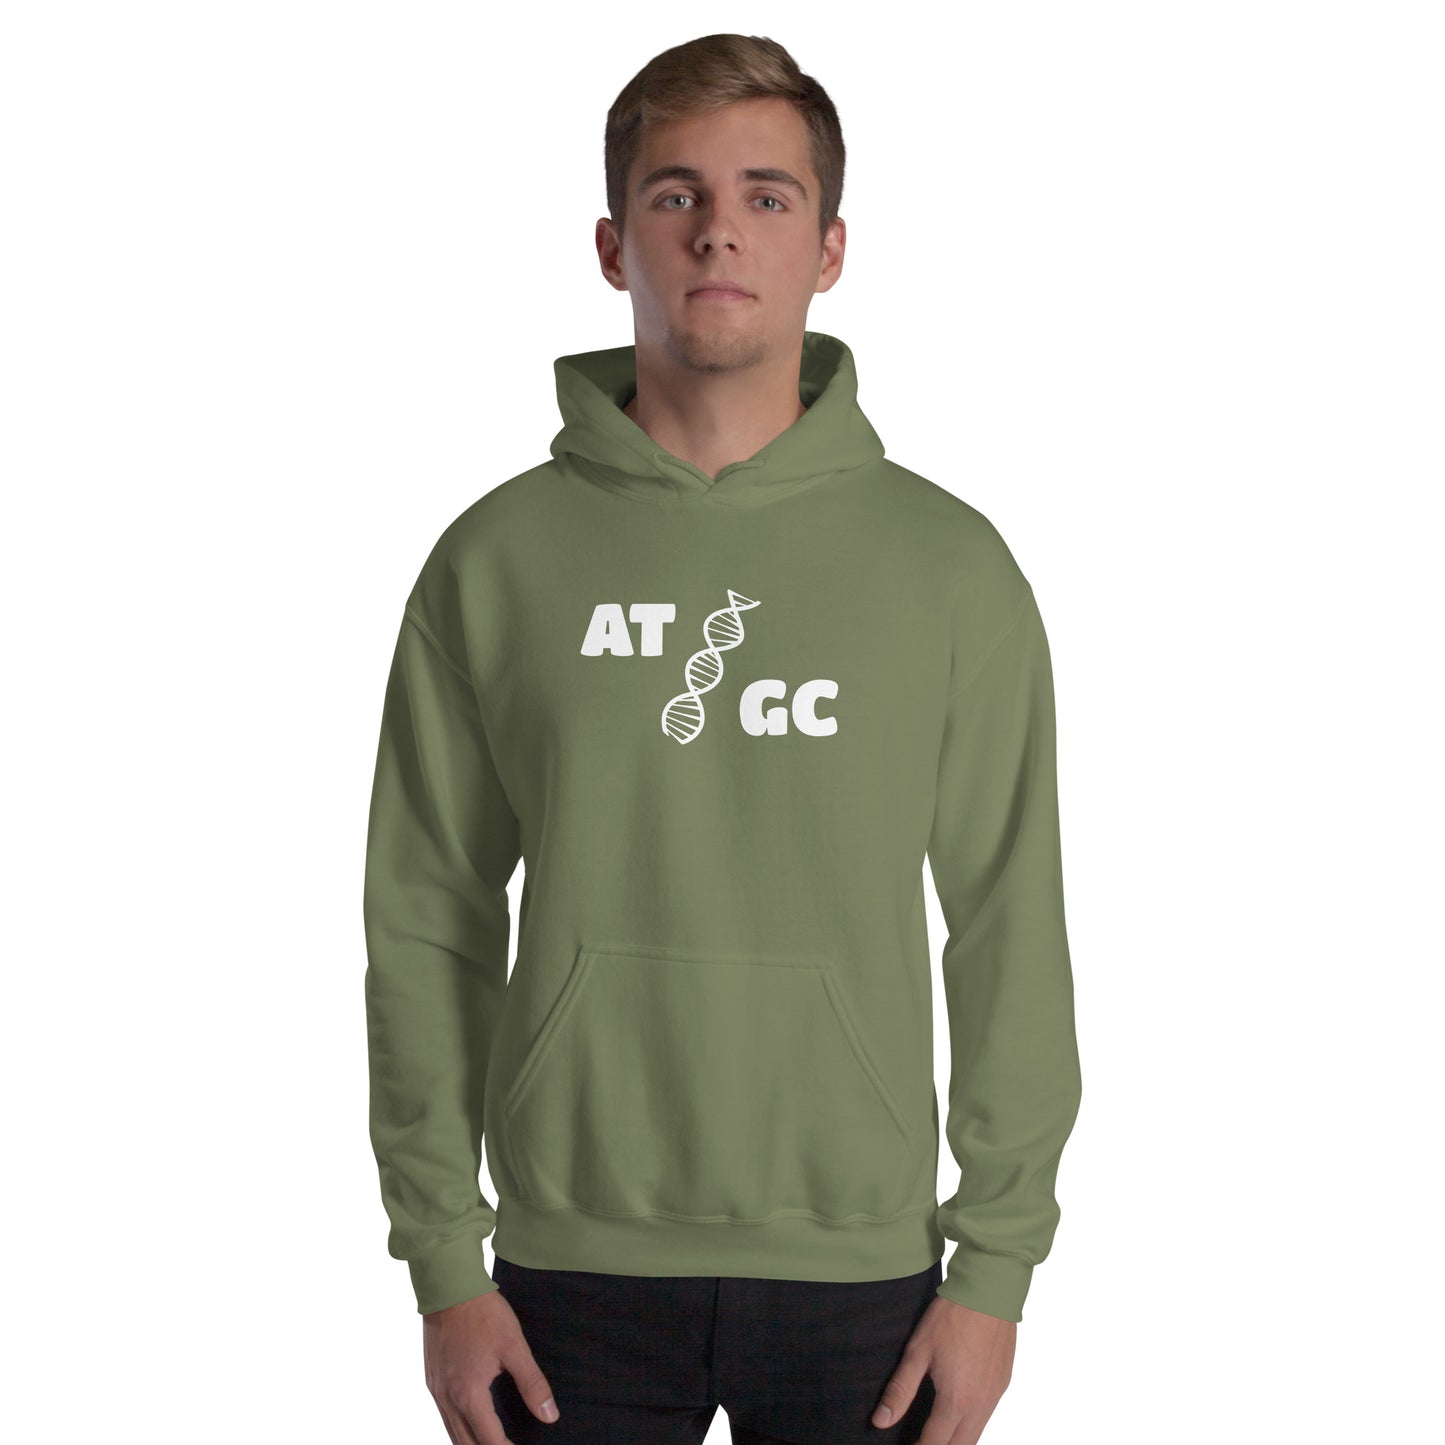 Men with military green hoodie with image of a DNA string and the text "ATGC"